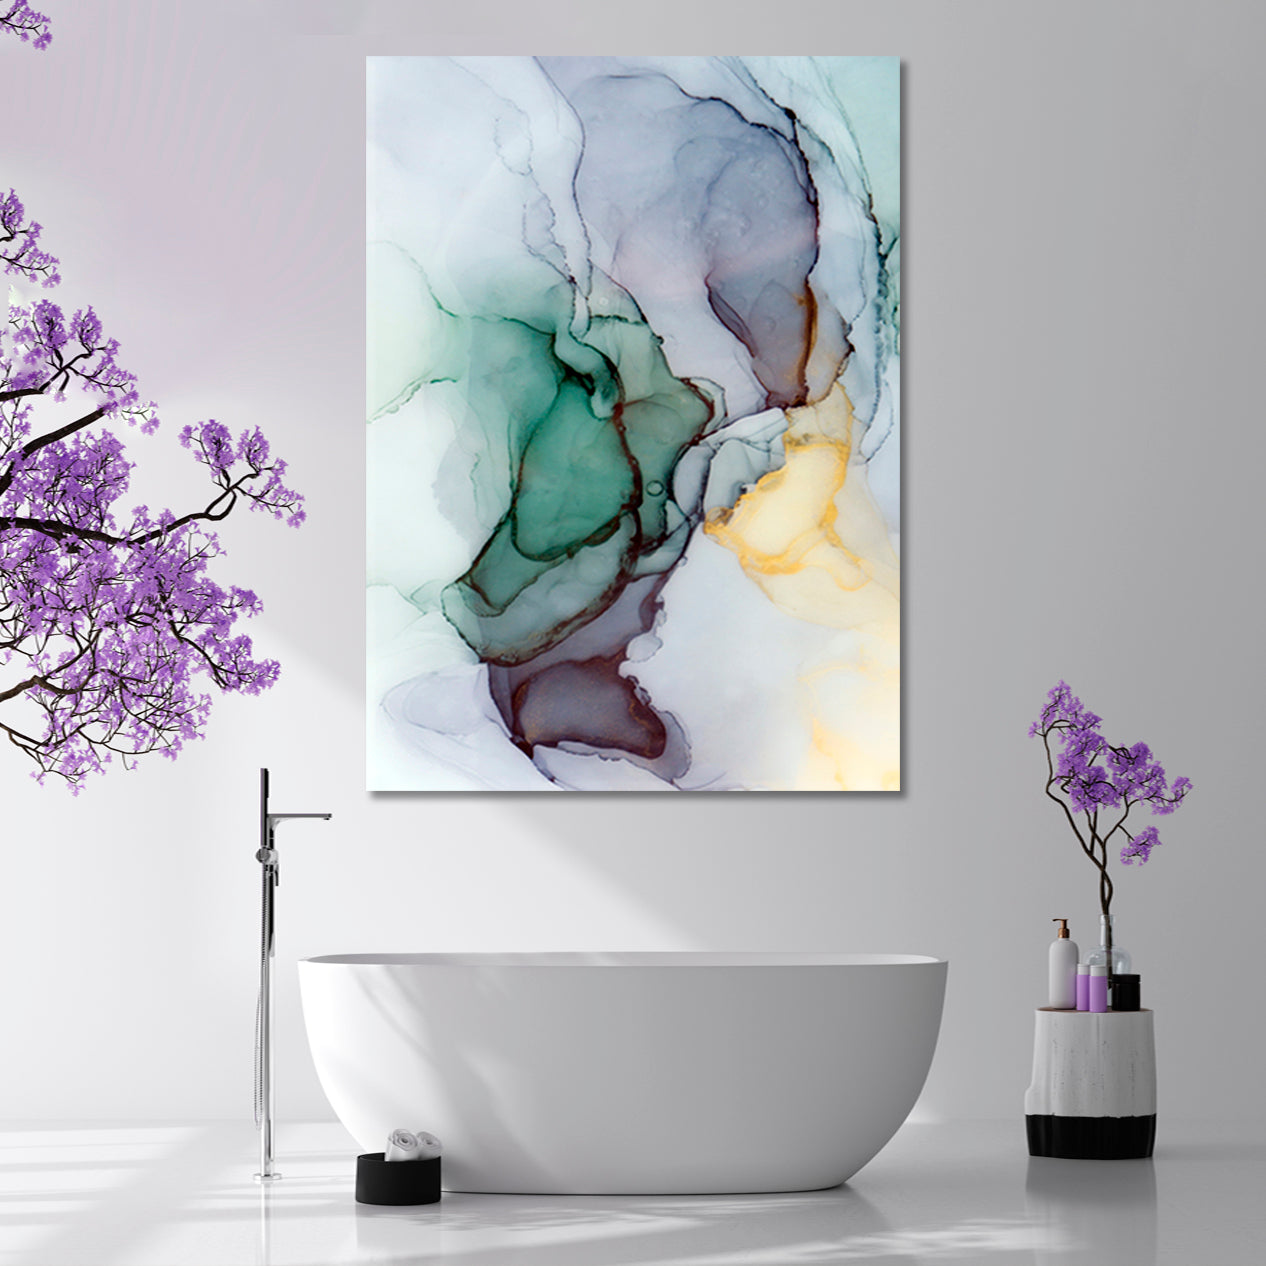 Abstract Veins Alcohol Ink Paint Translucent Free-flowing Fluid Art, Oriental Marbling Canvas Print Artesty   